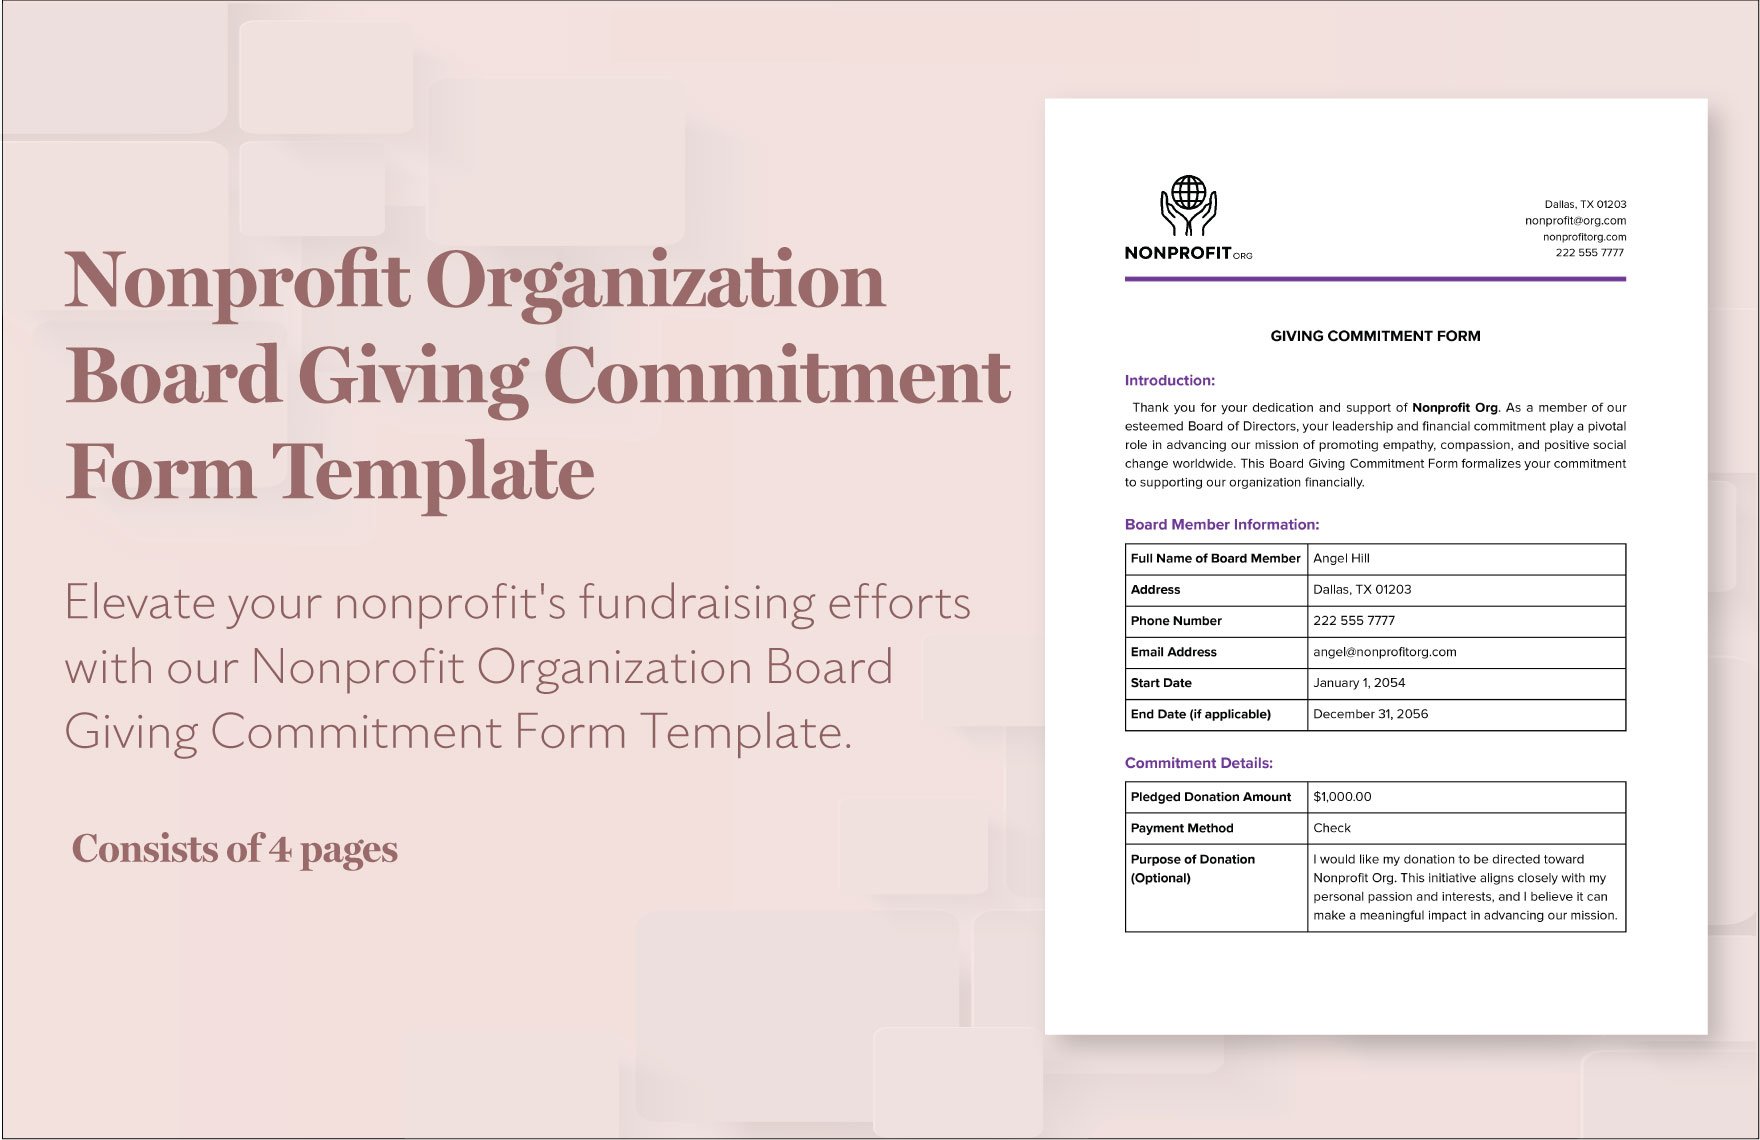 Nonprofit Organization Board Giving Commitment Form Template